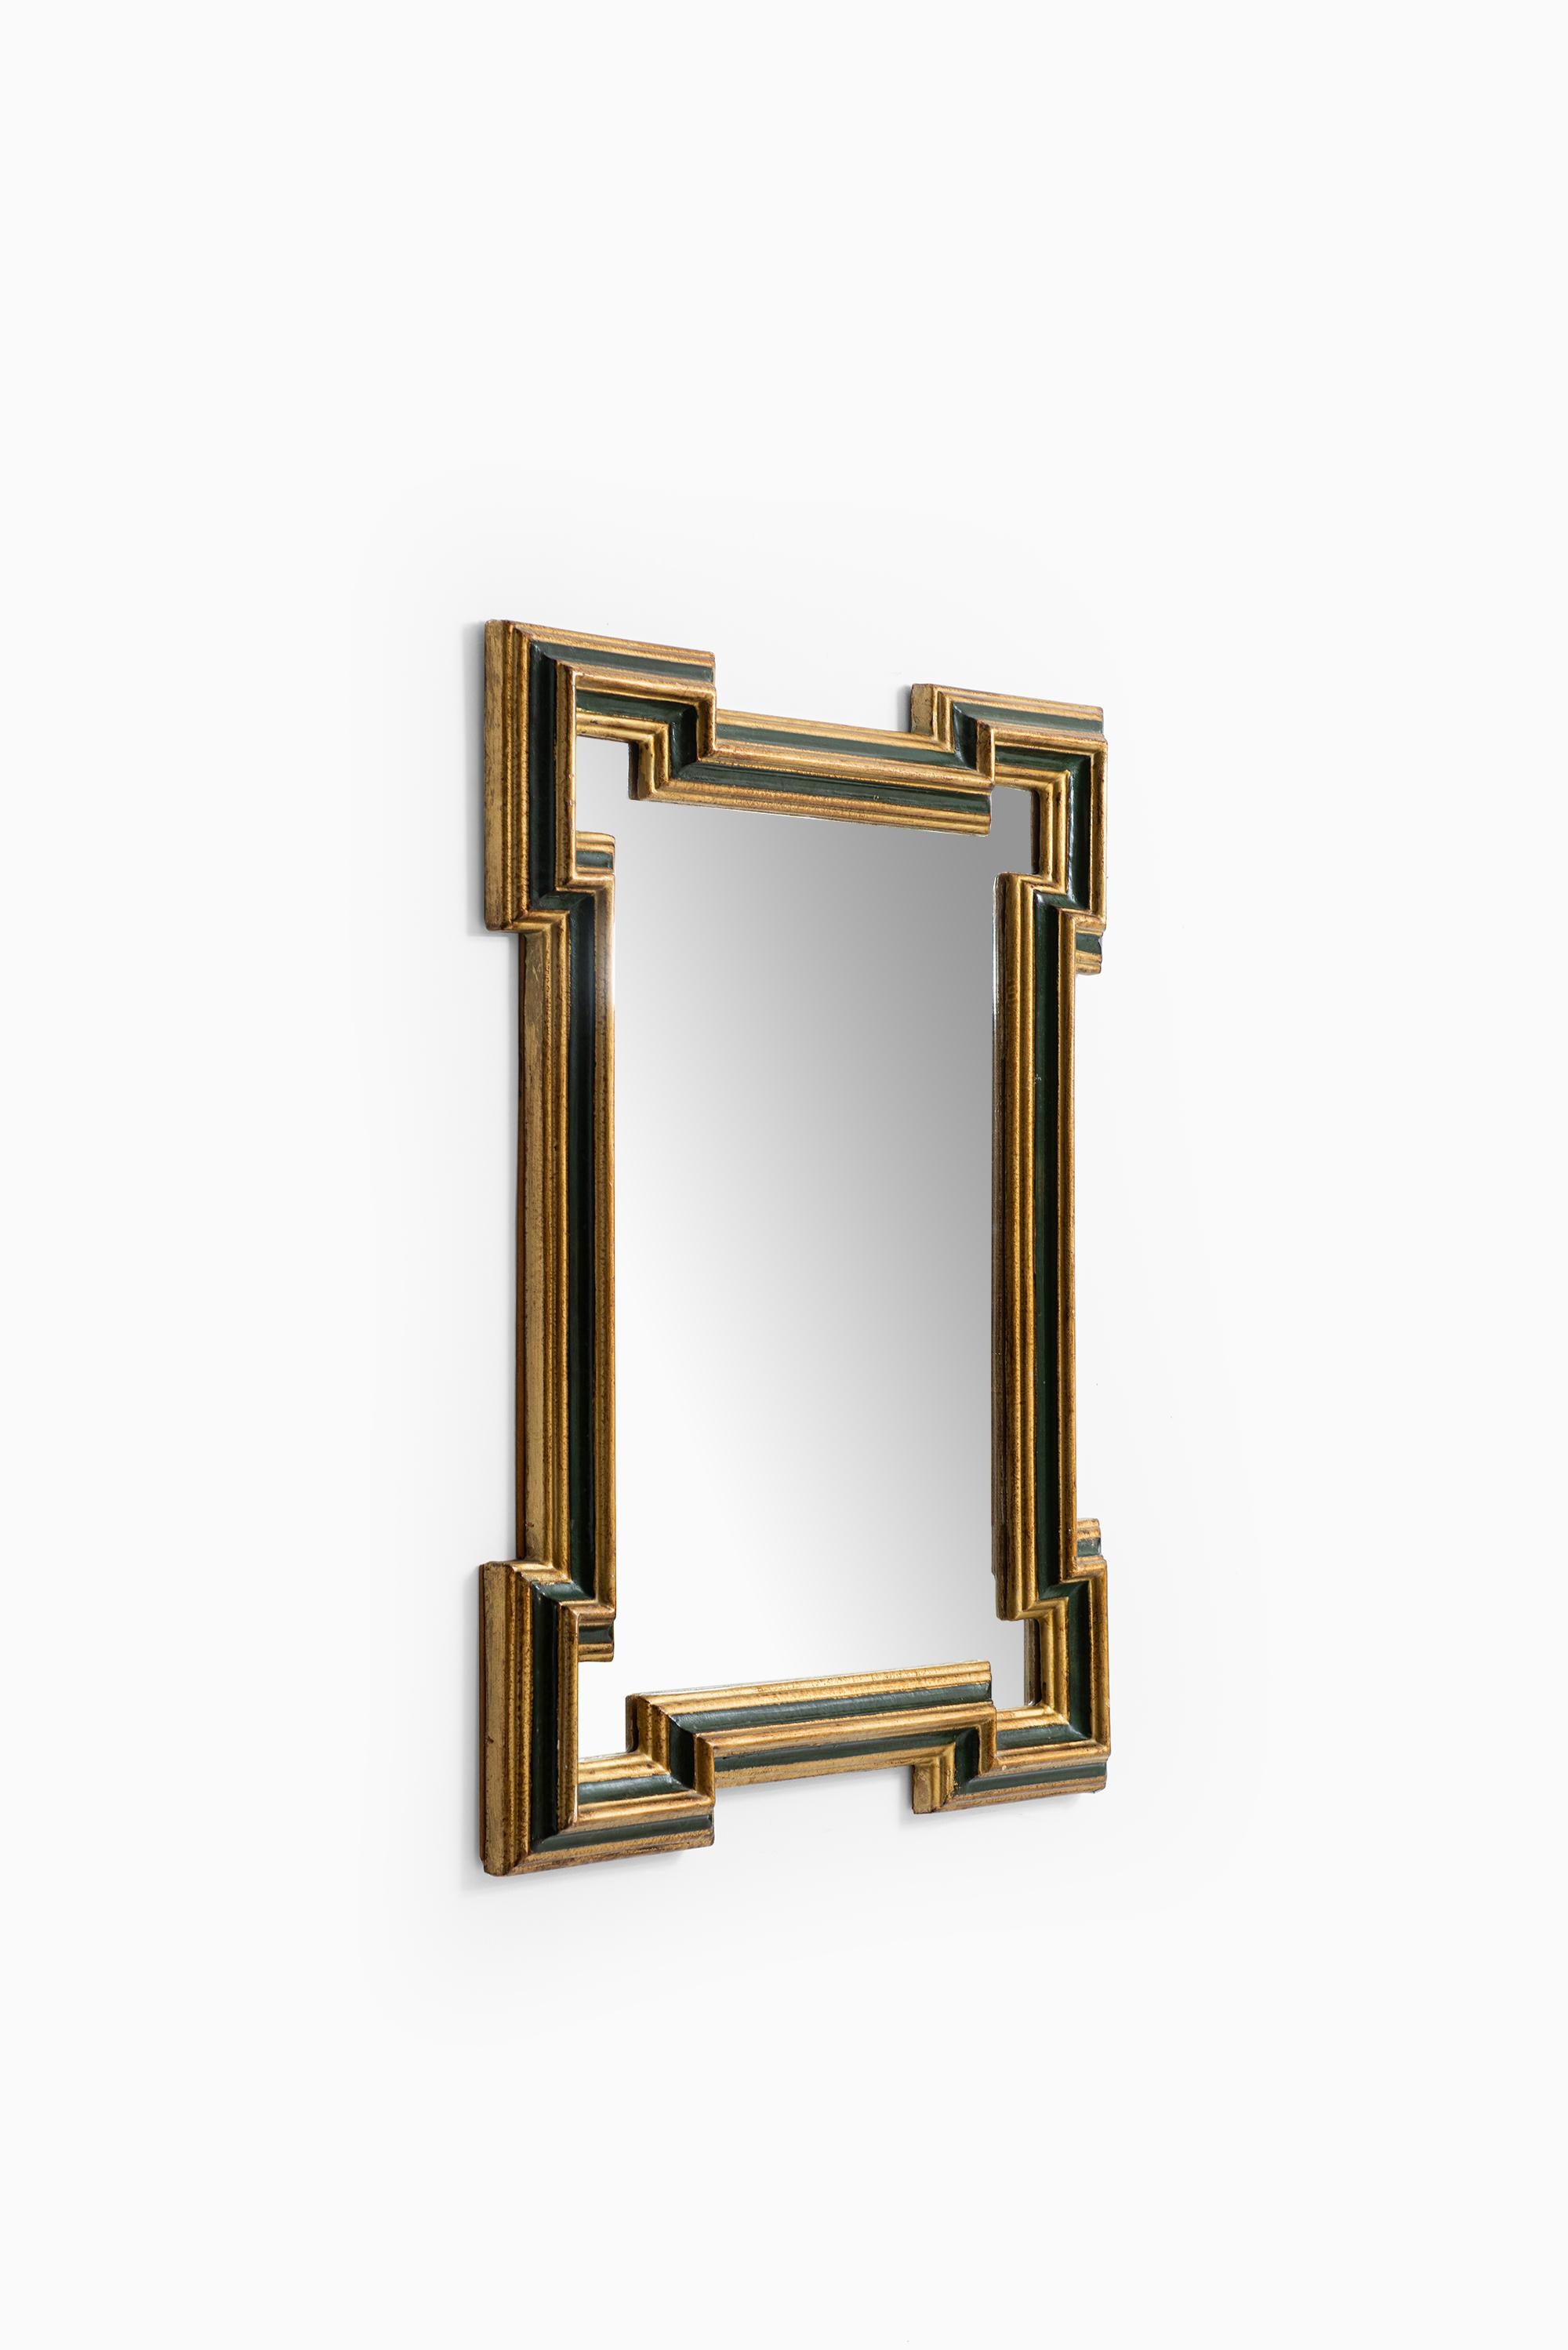 Big and decorative mirror by unknown designer. Produced in Sweden.